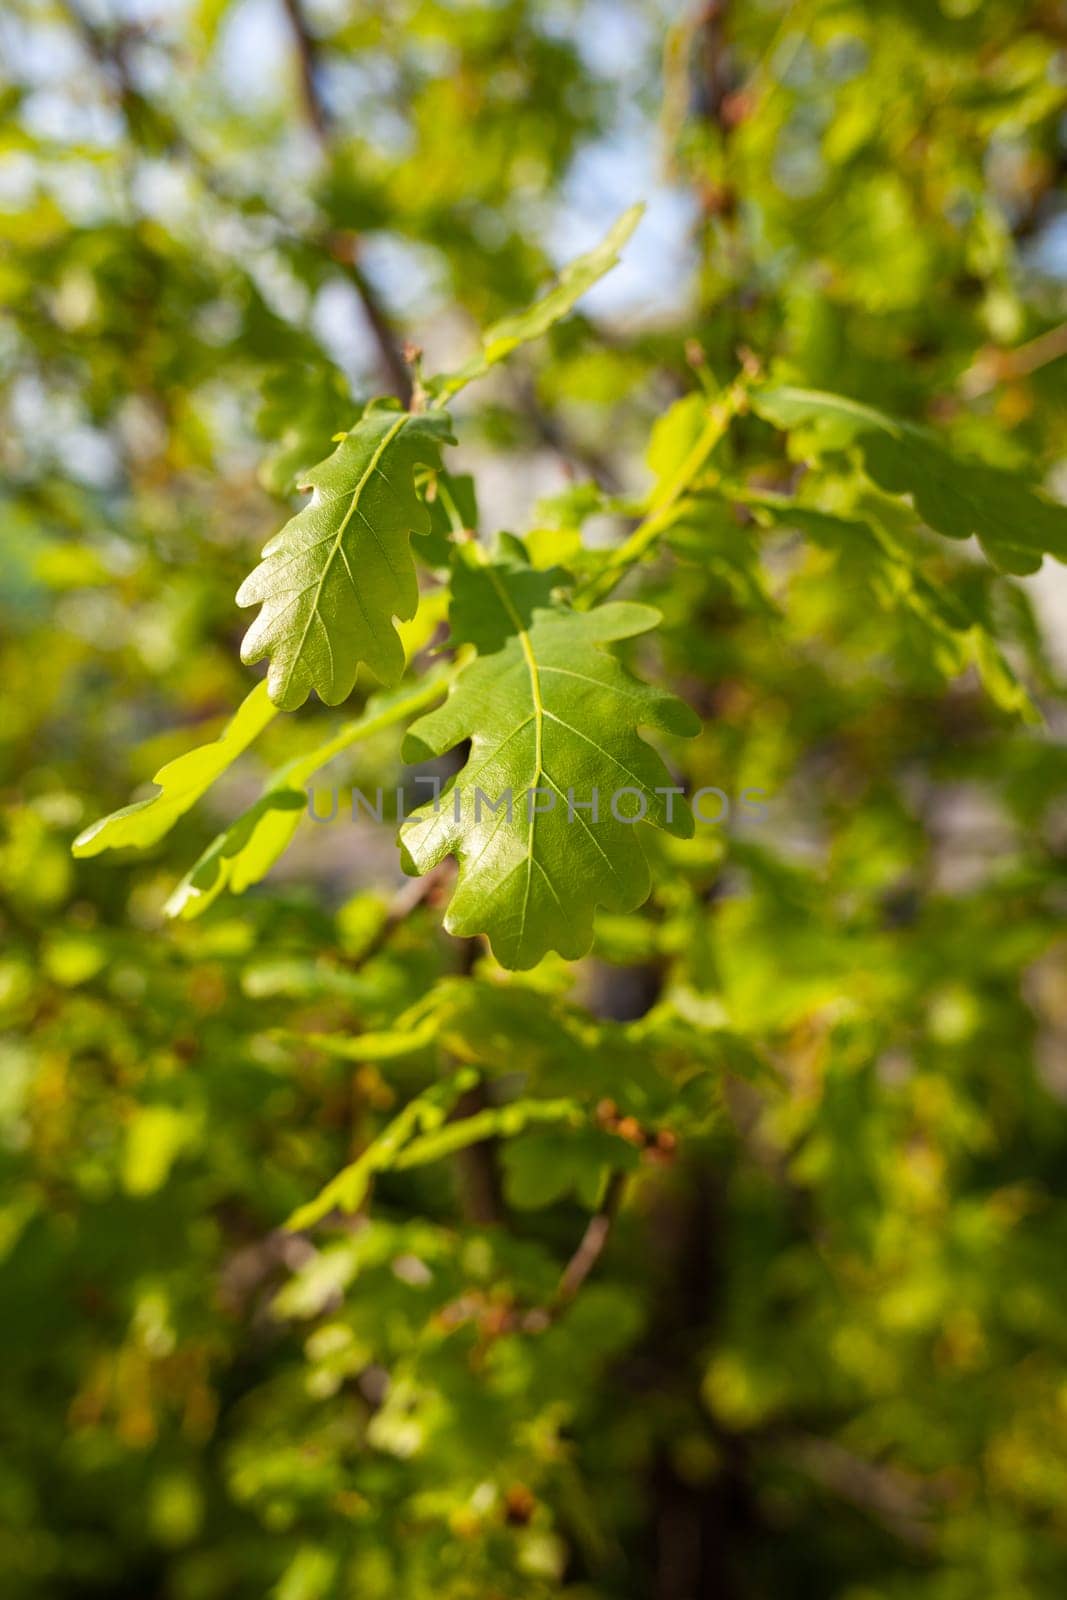 Green fresh oak leaves. Fresh foliage on trees at sunset against a spring background.